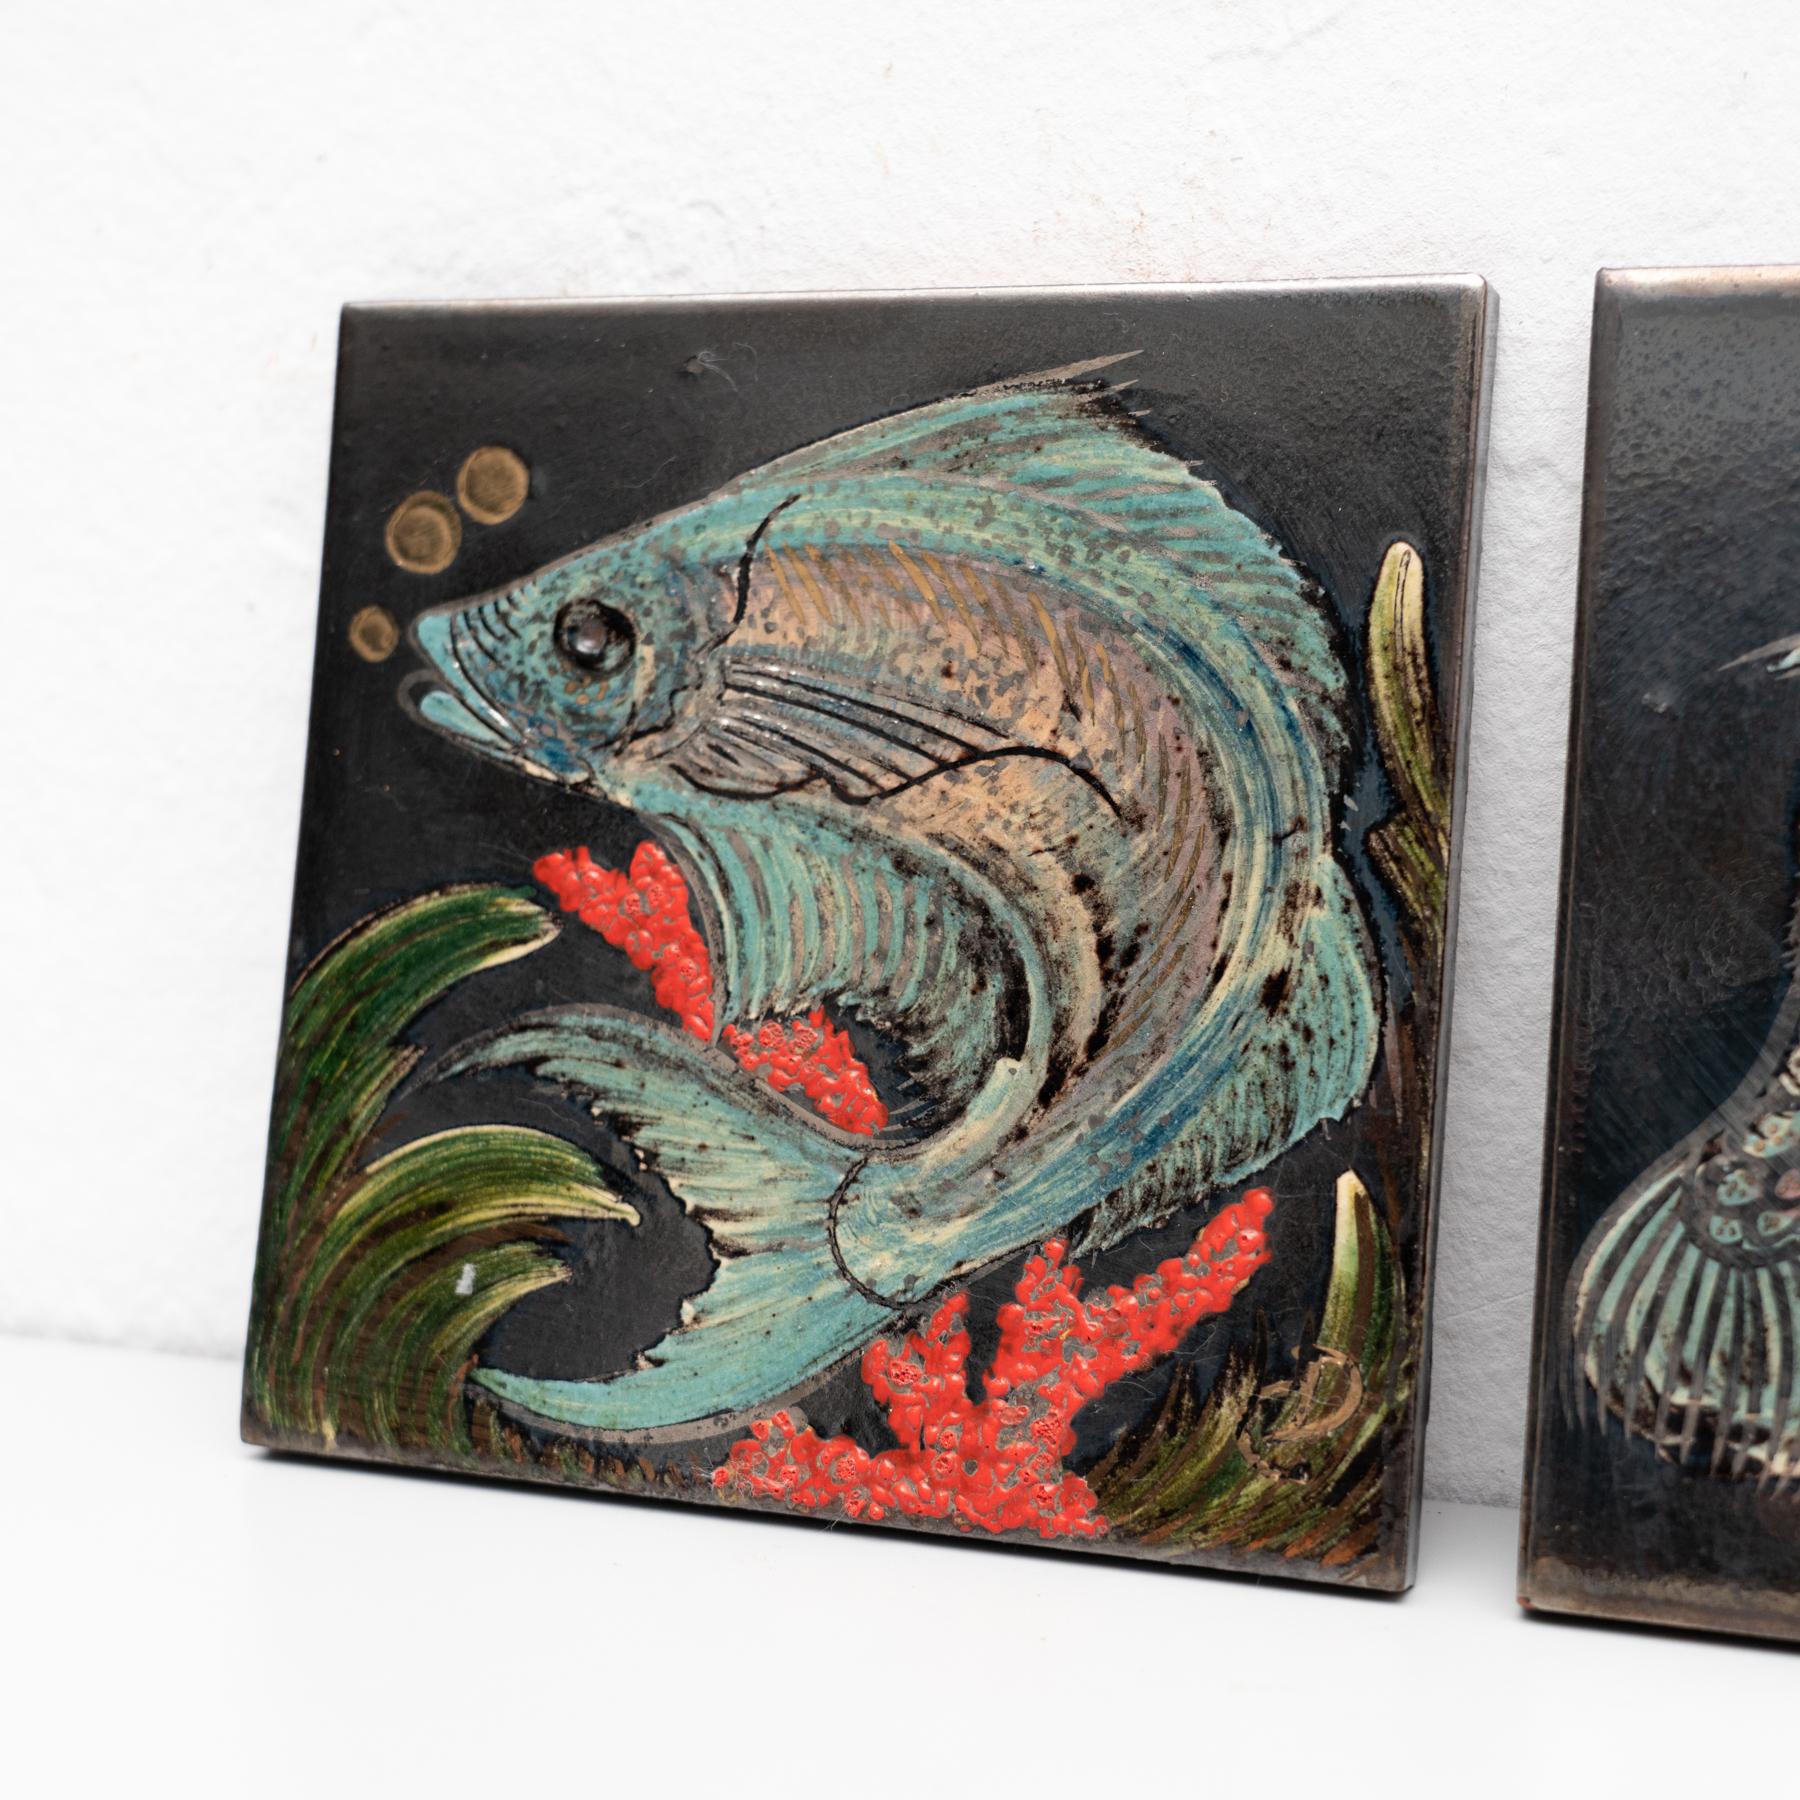 Diaz Costa Set of Two Ceramic Hand Painted Artwork, circa 1960 For Sale 2